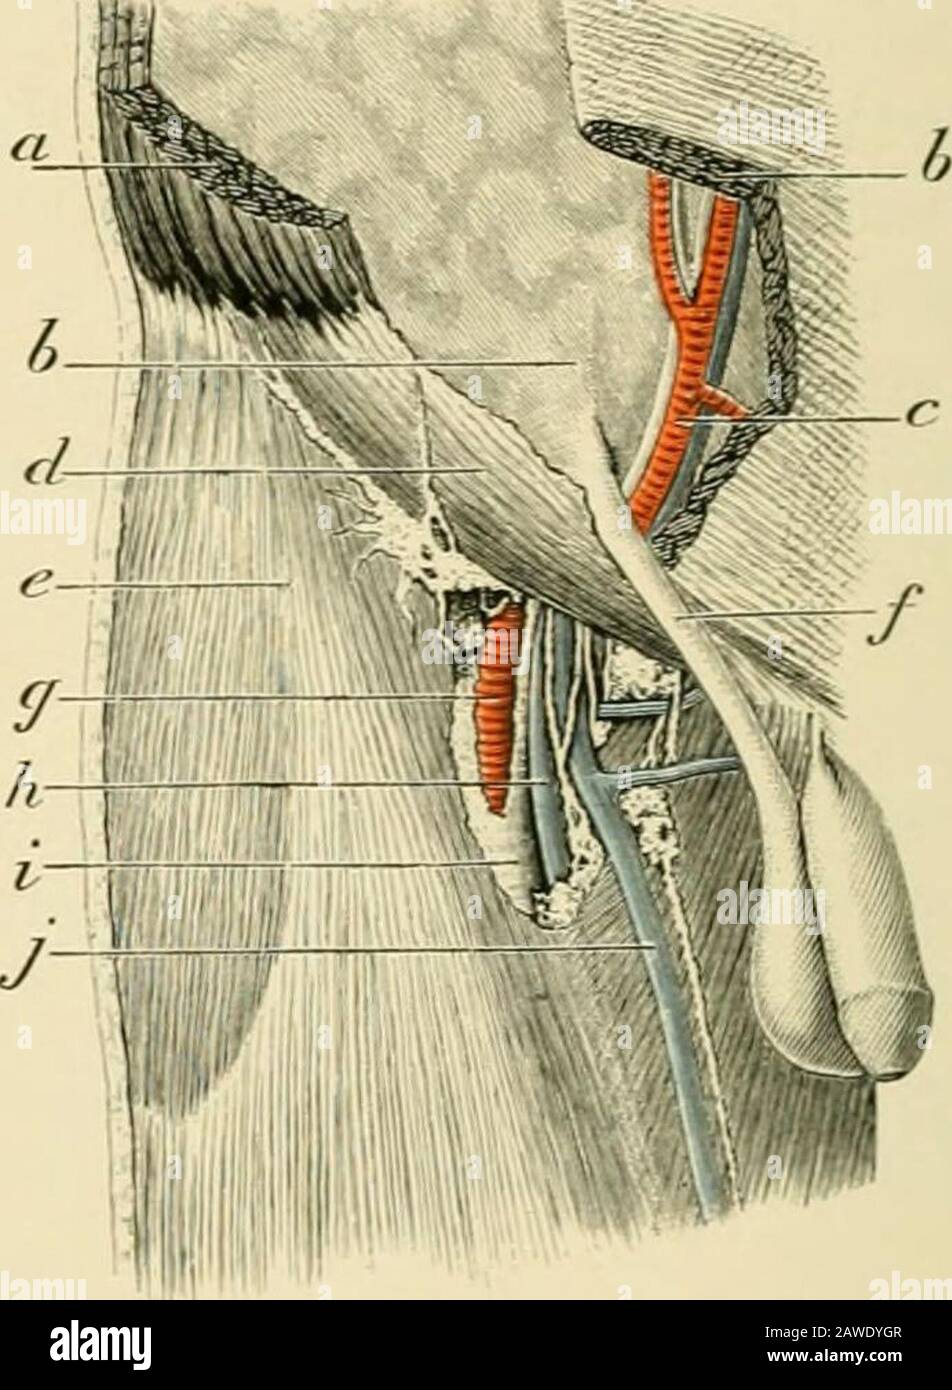 Operative surgery . Fig. 1113. Fig. 1114. Fig. 1113.—Indirect or oblique inguinal hernia, omental and intestinal contents, a,a. Integument and superficial fascia, h. Aponeurosis of external oblique muscle, c. Fascia transversalis. d. Sac of hernia, e. Omentum. /. Intestine.Fig. 1114.—The anatomy of inguinal and femoral regions, showing course of descent of indirect or oblique inguinal hernia, o. Divided borders of abdominal muscles, b. Transversalis fascia, c. Deep epigastric vessels, d. Aponeurosis of external oblique muscle, e. Fascia lata. /. Spermatic cord. g. Femoral artery, h. Femoral ve Stock Photo